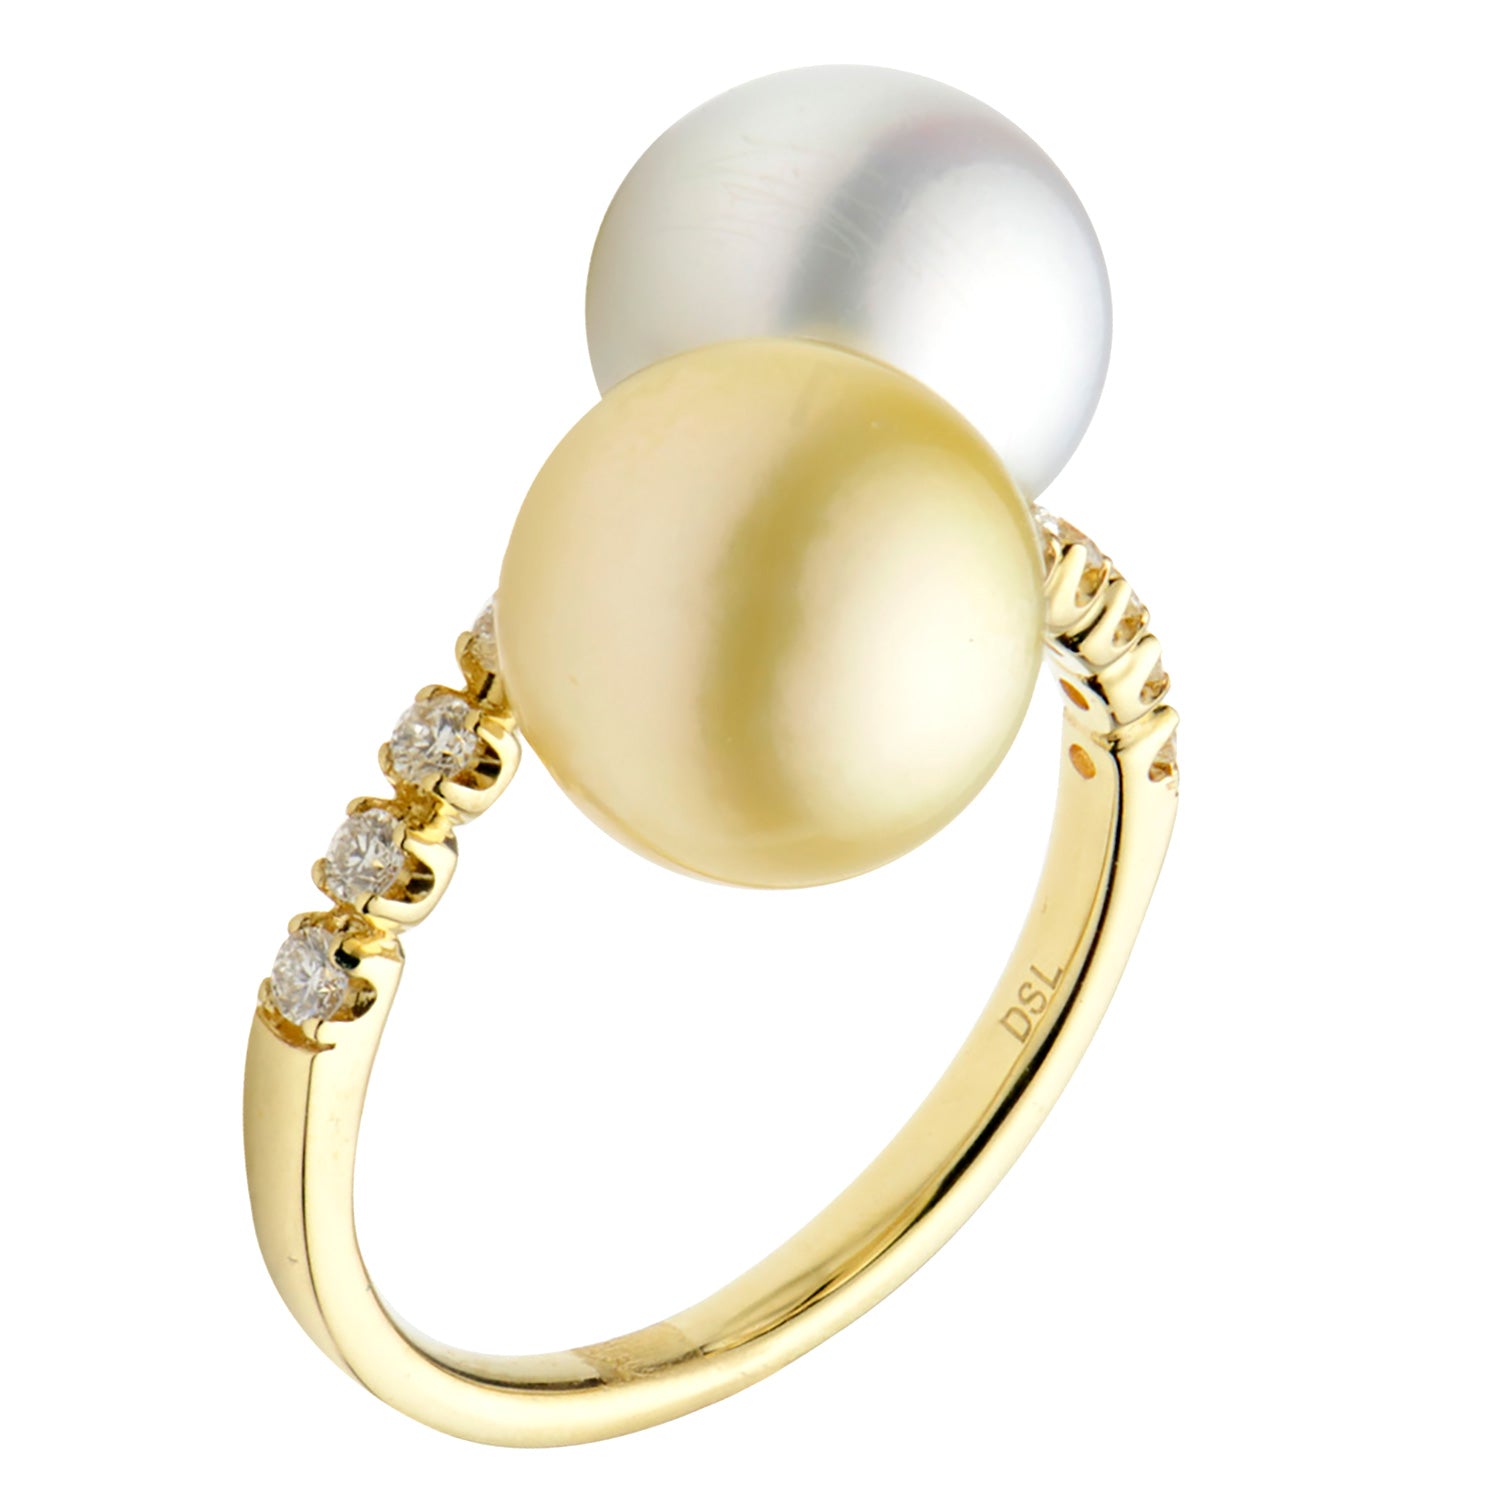 18K Yellow Gold White & Golden South Sea Pearl Spiral Diamond Ring, 14-15mm